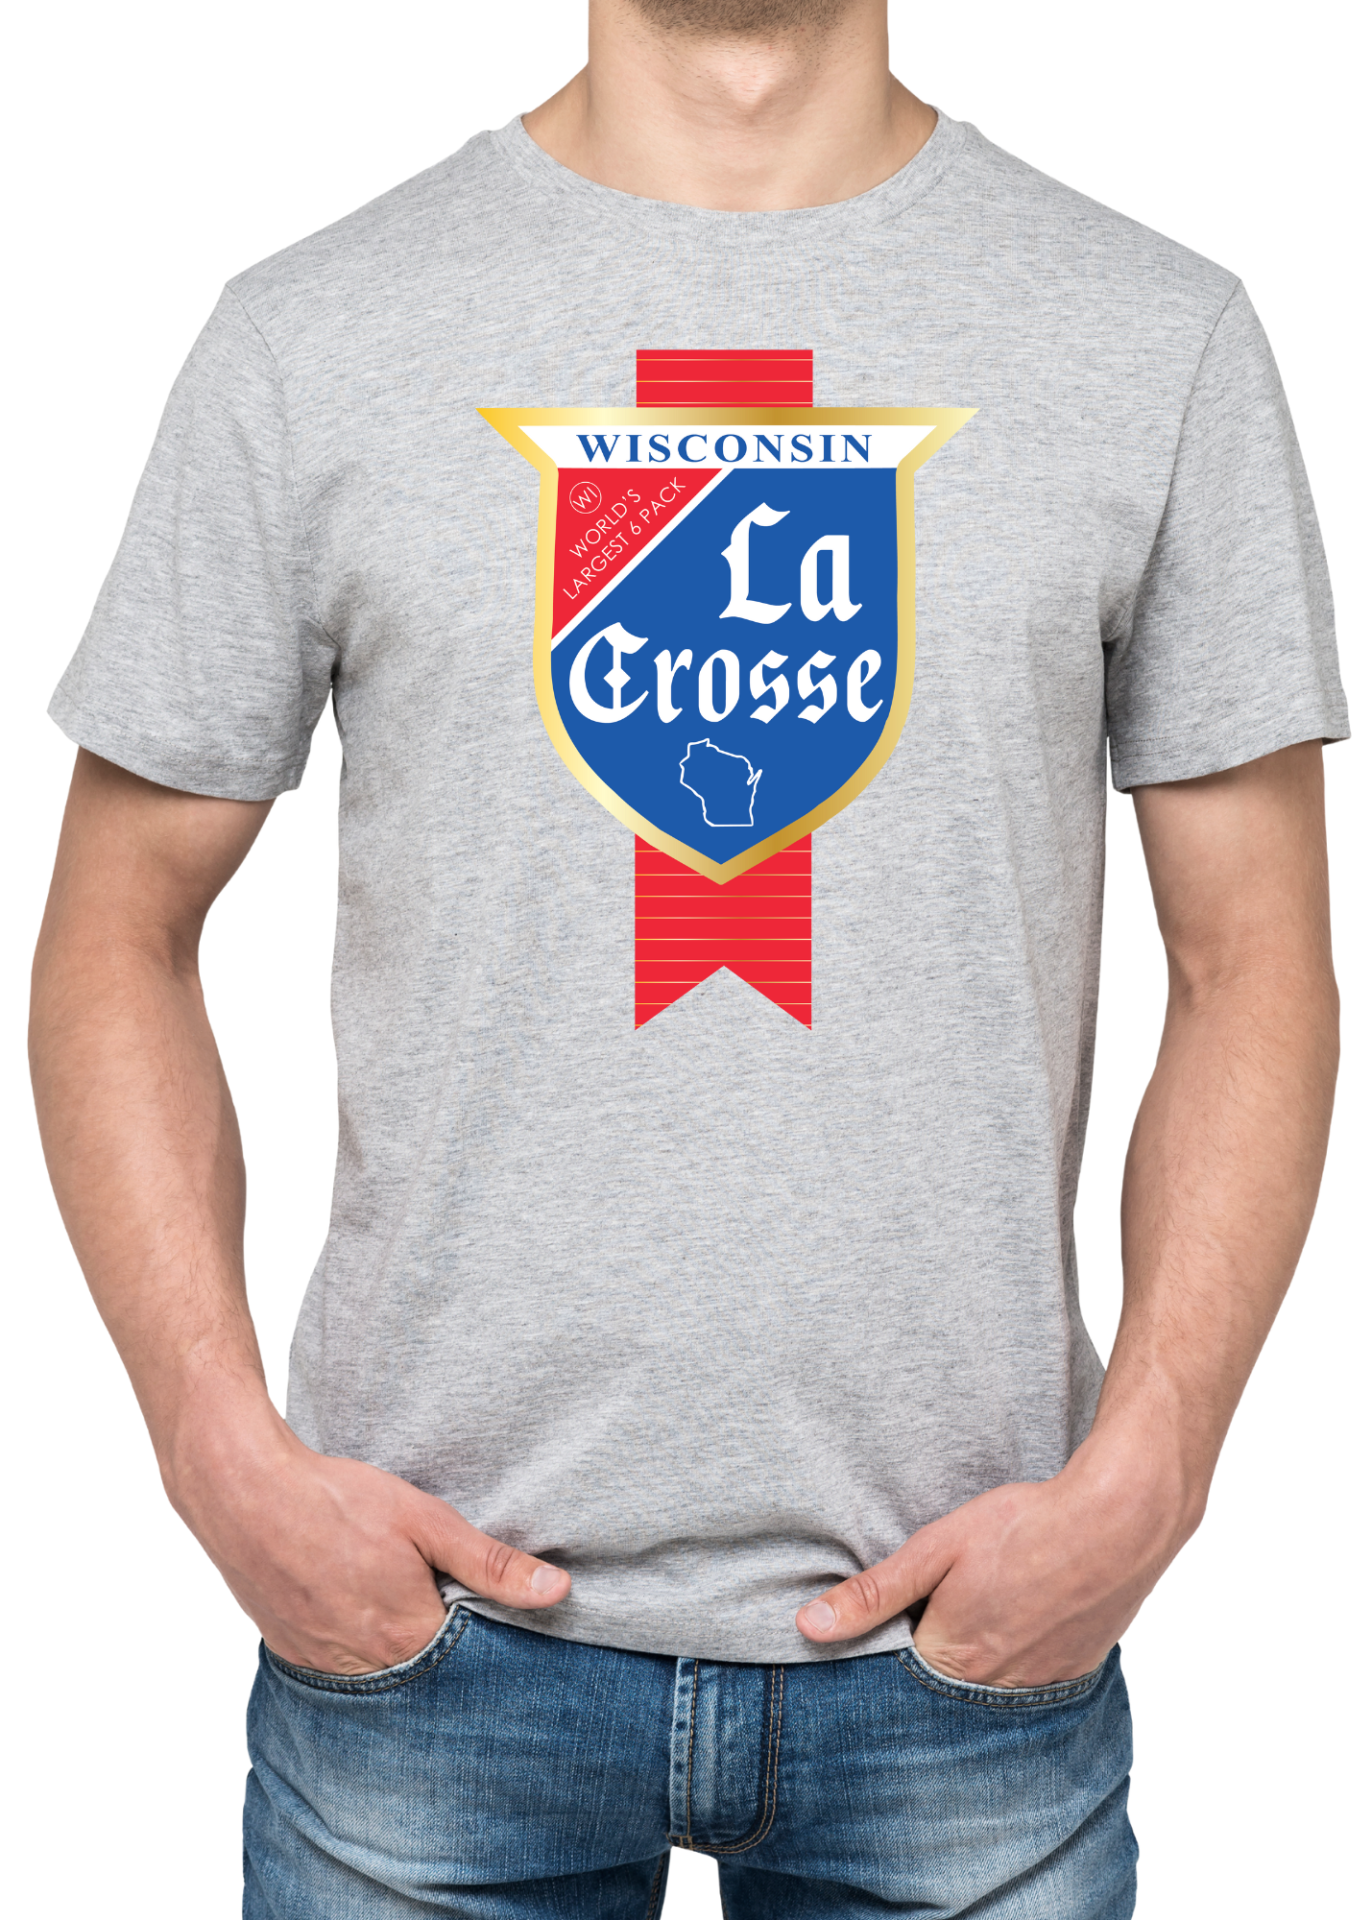 La Crosse text in a blue and red badge on a grey t-shirt